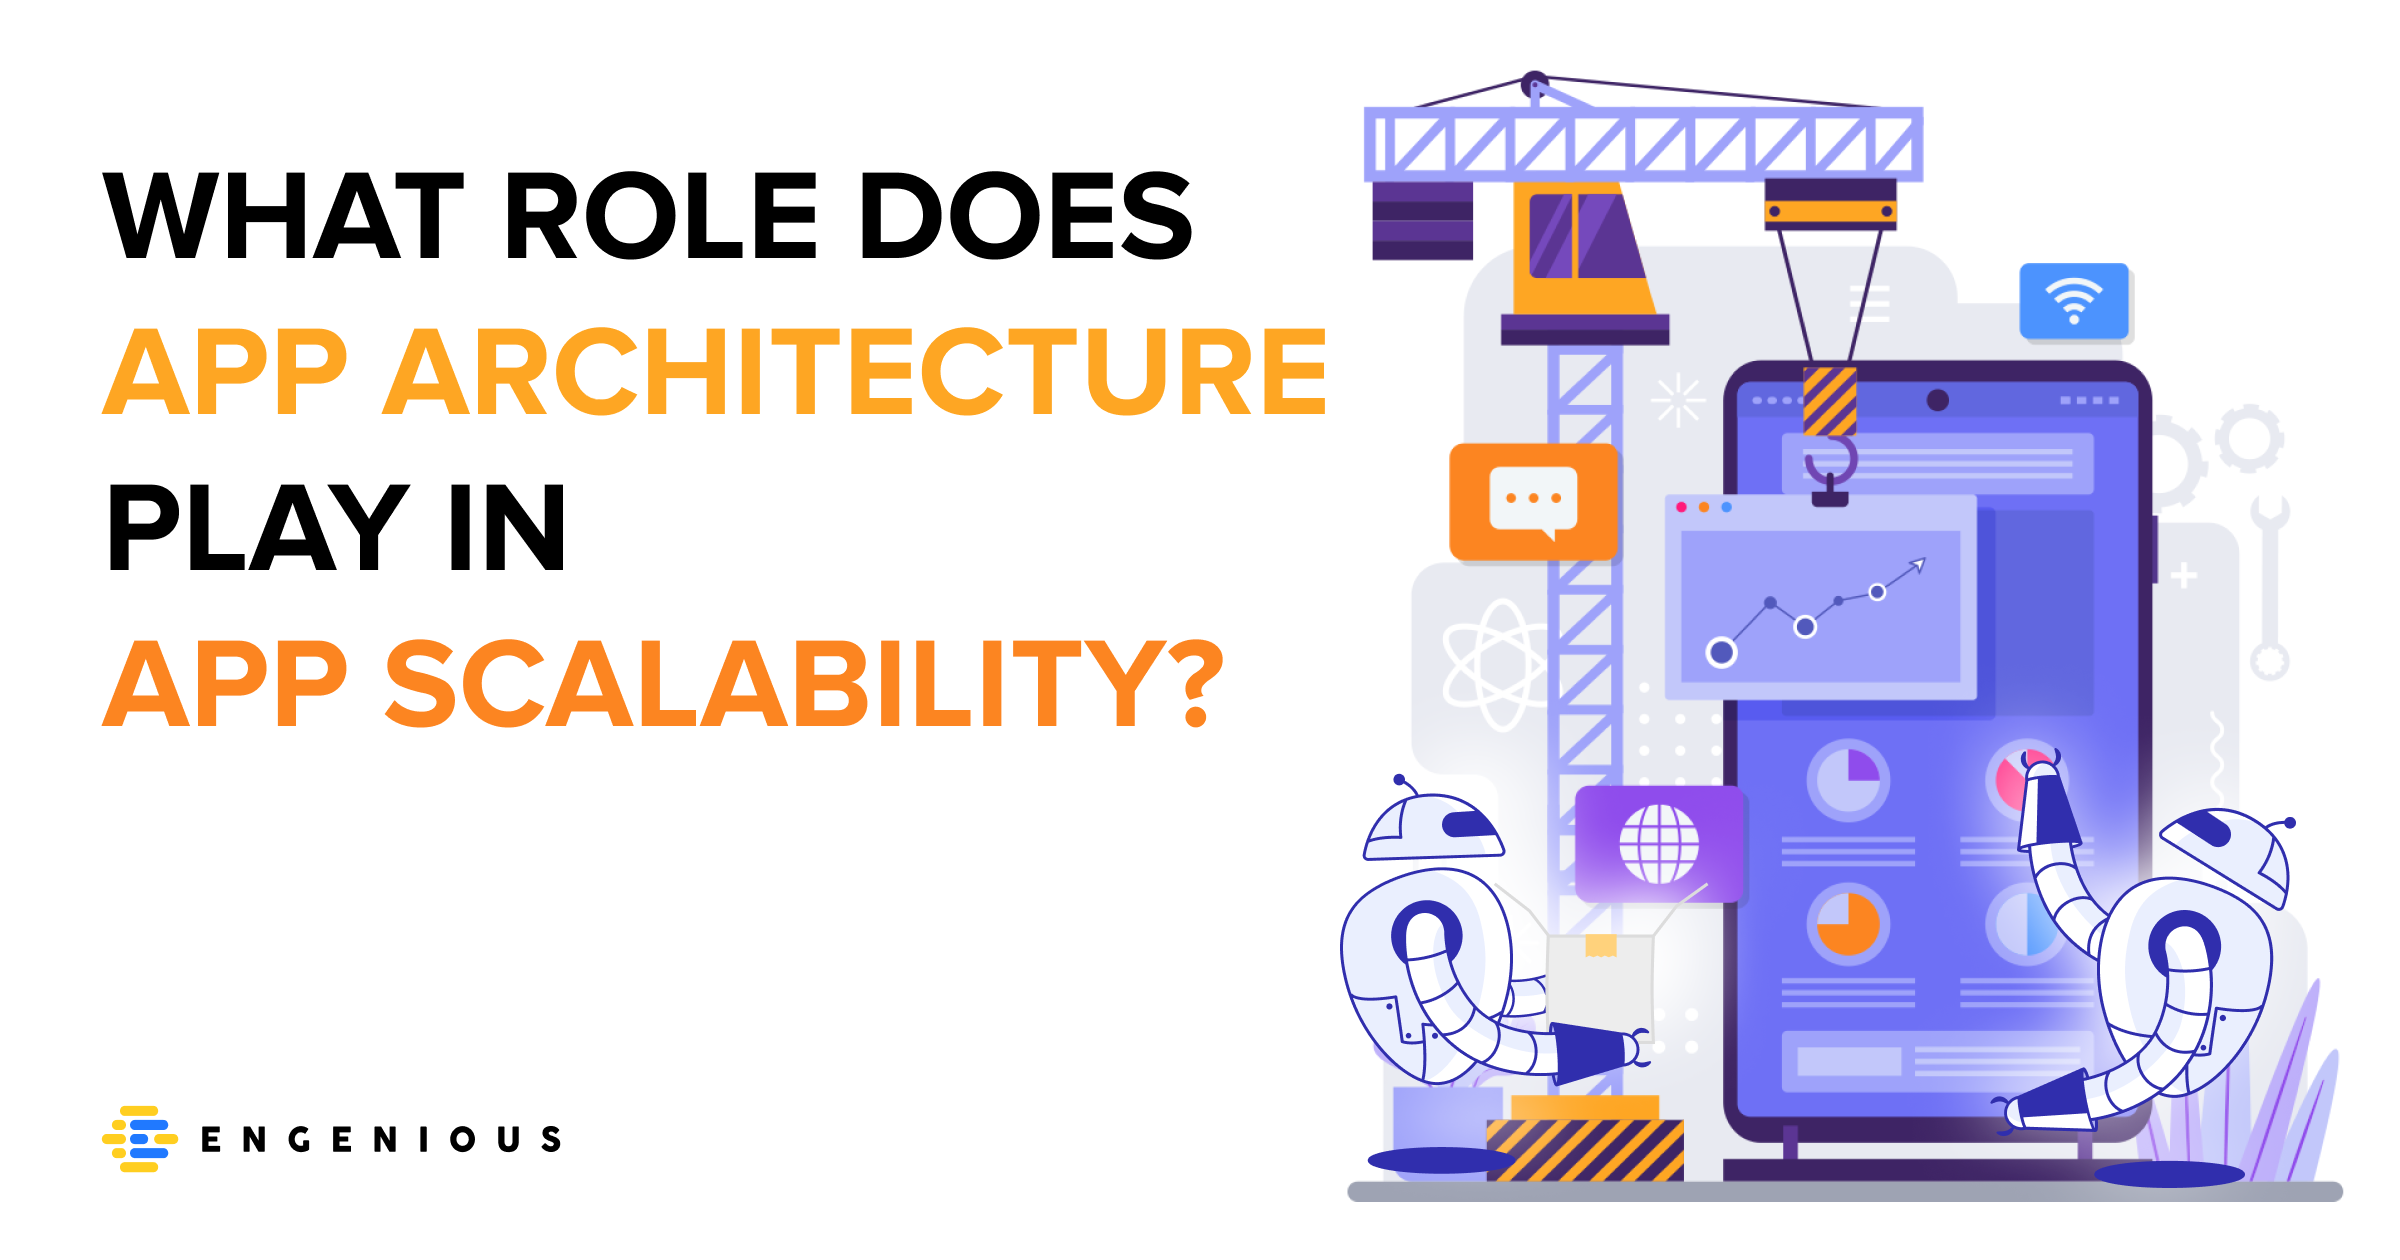 What role does app architecture play in app scalability?